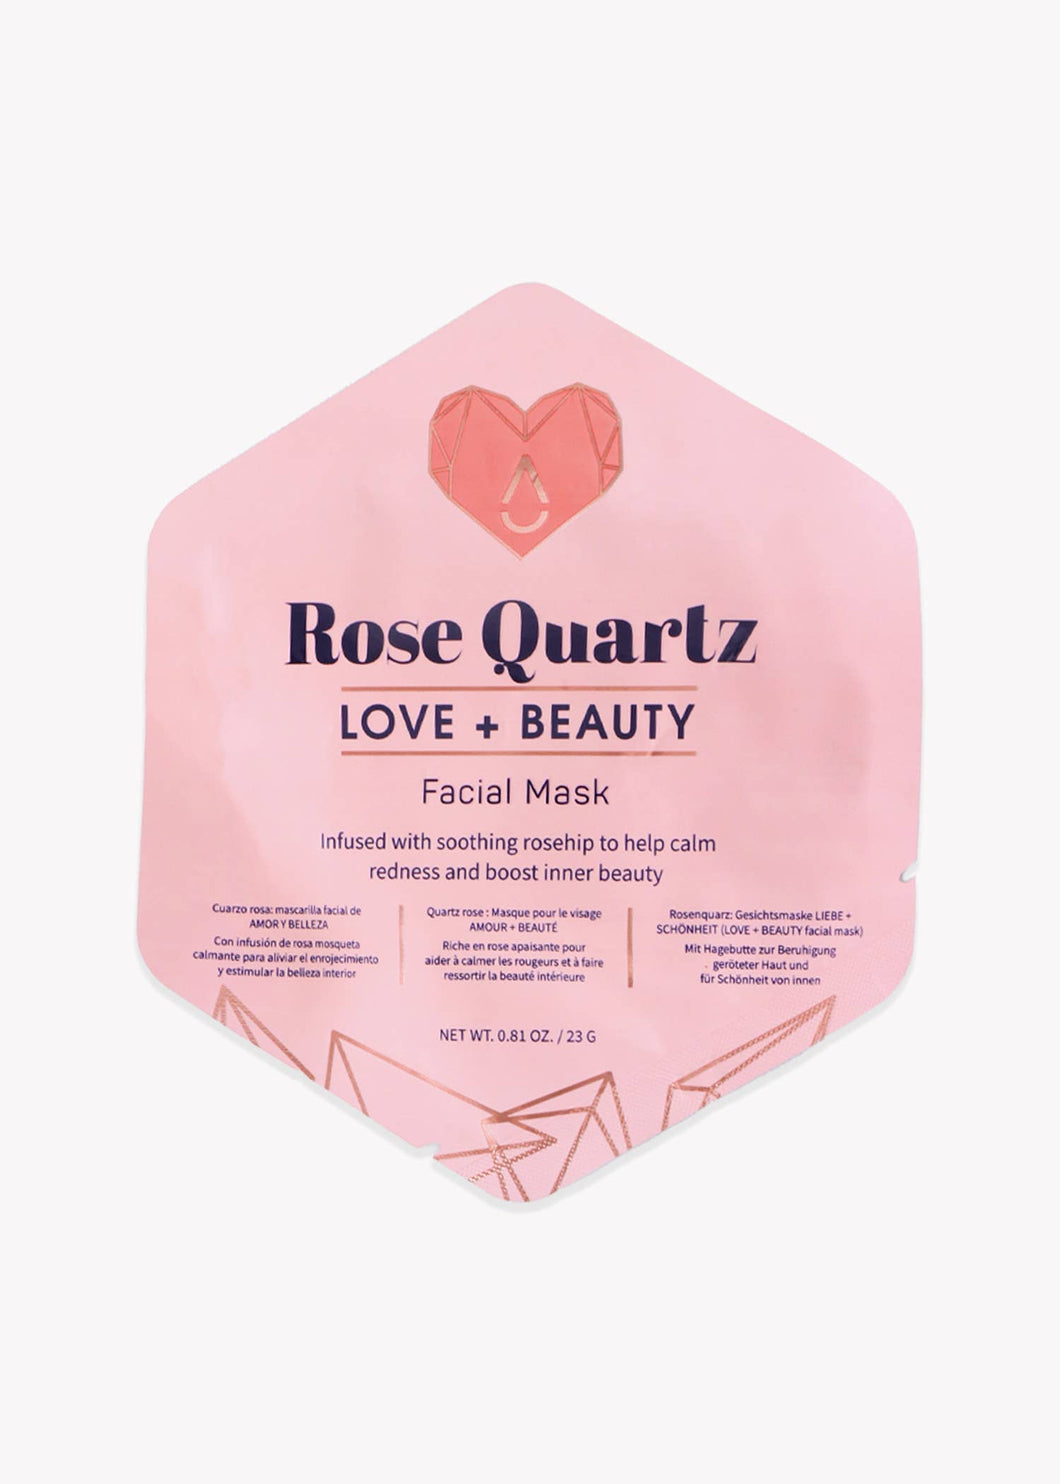 Soothing Rosehip Inspired Facial Mask